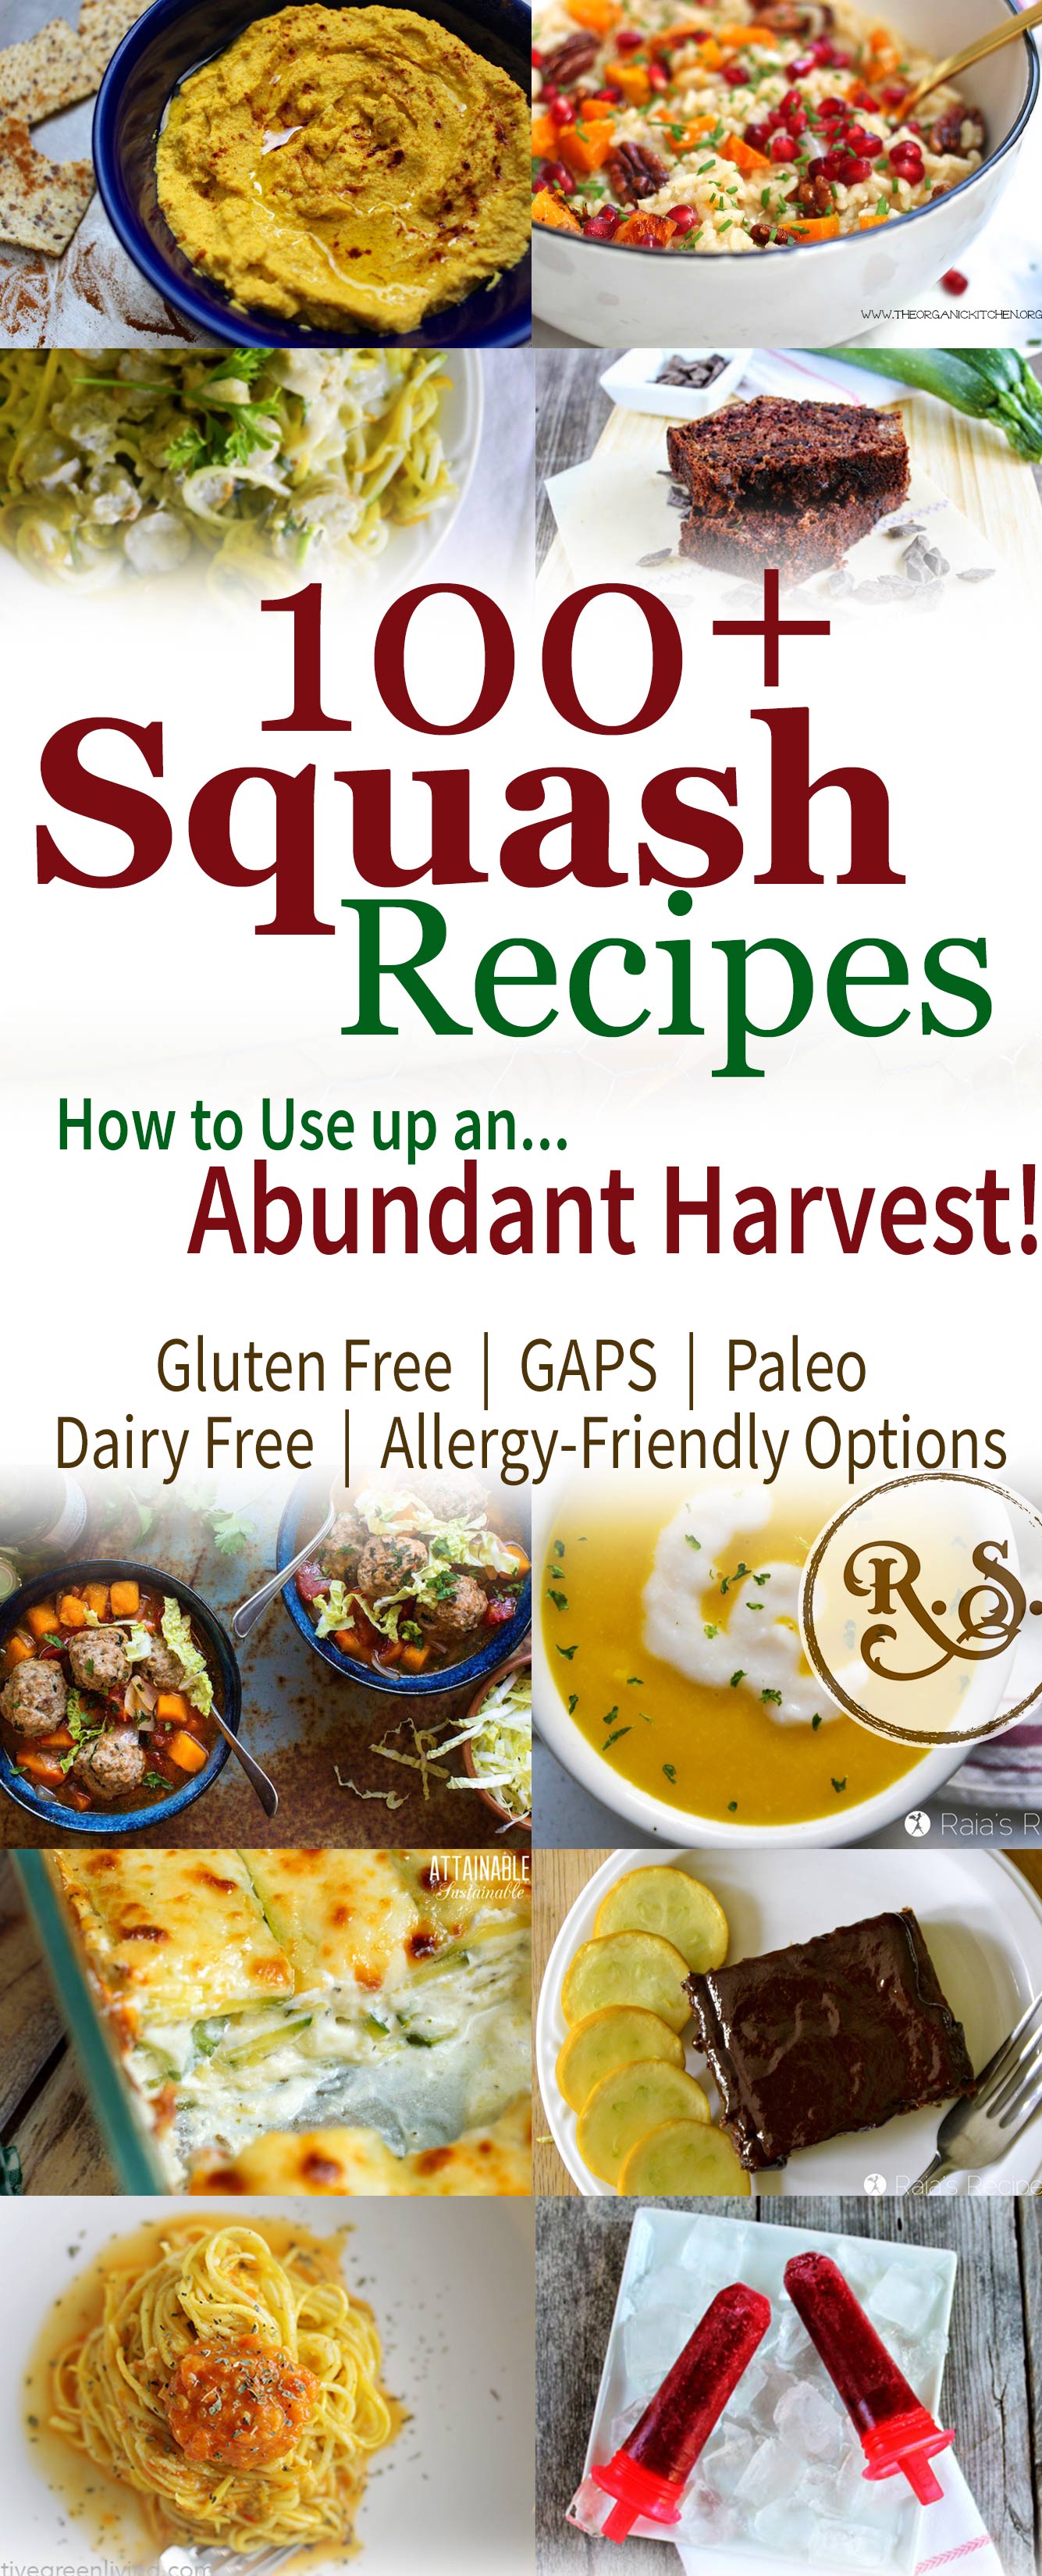 Find 100+ squash recipes to use up an abundant squash harvest from your garden. When squash is in season you can’t have too many recipes. Find the right easy squash recipe for you.